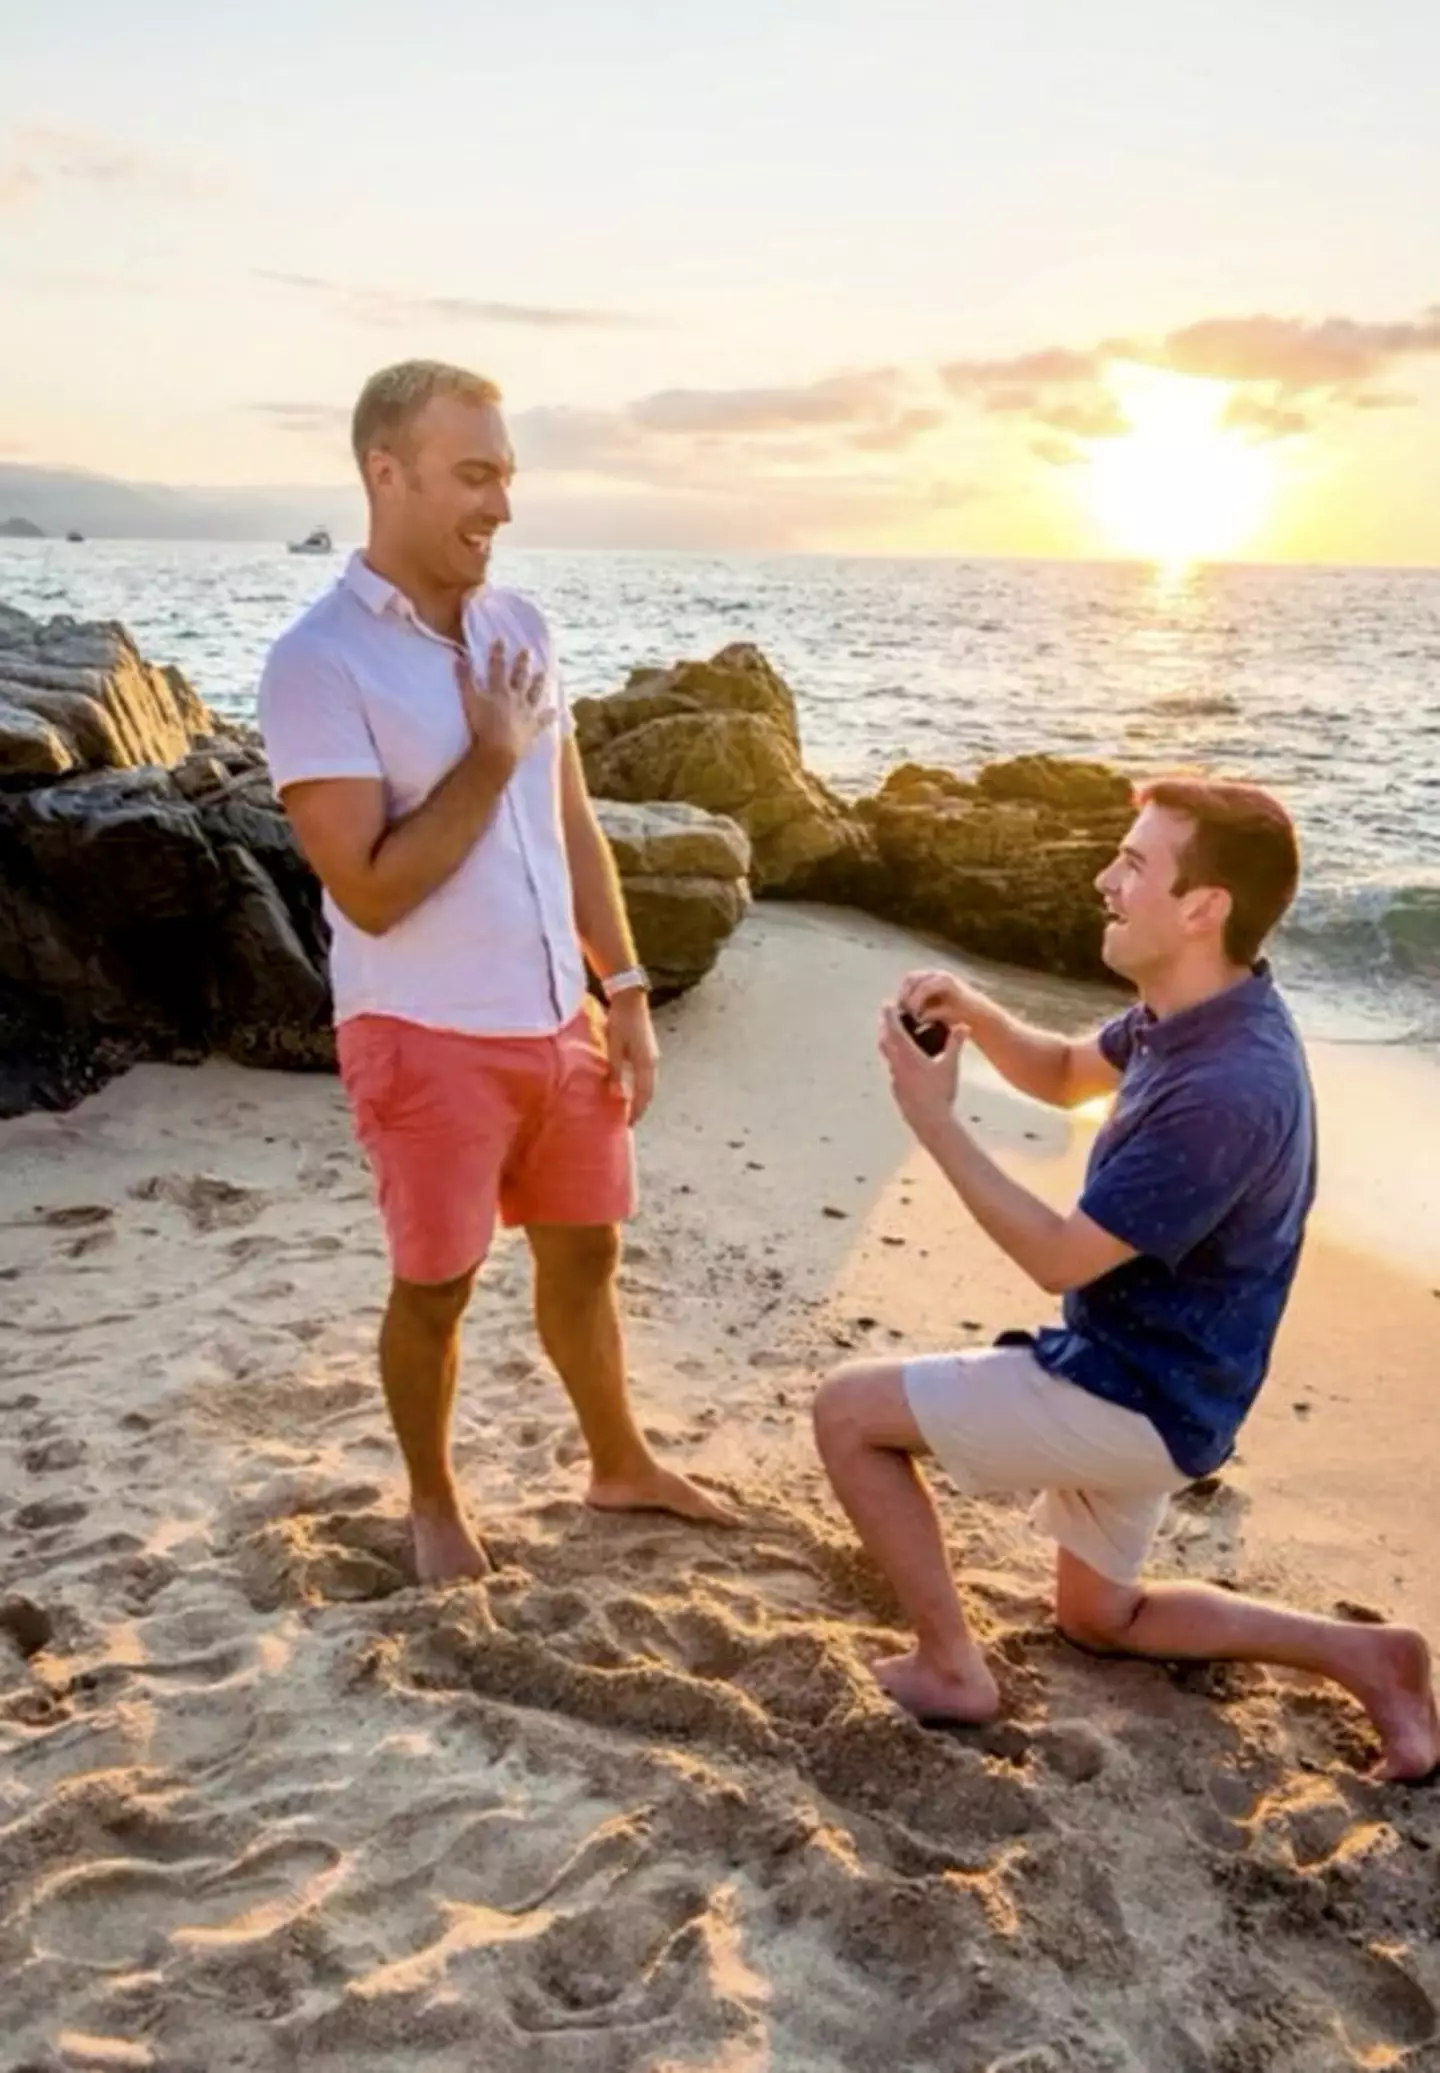 Trevor popped the question immediately after Corey.